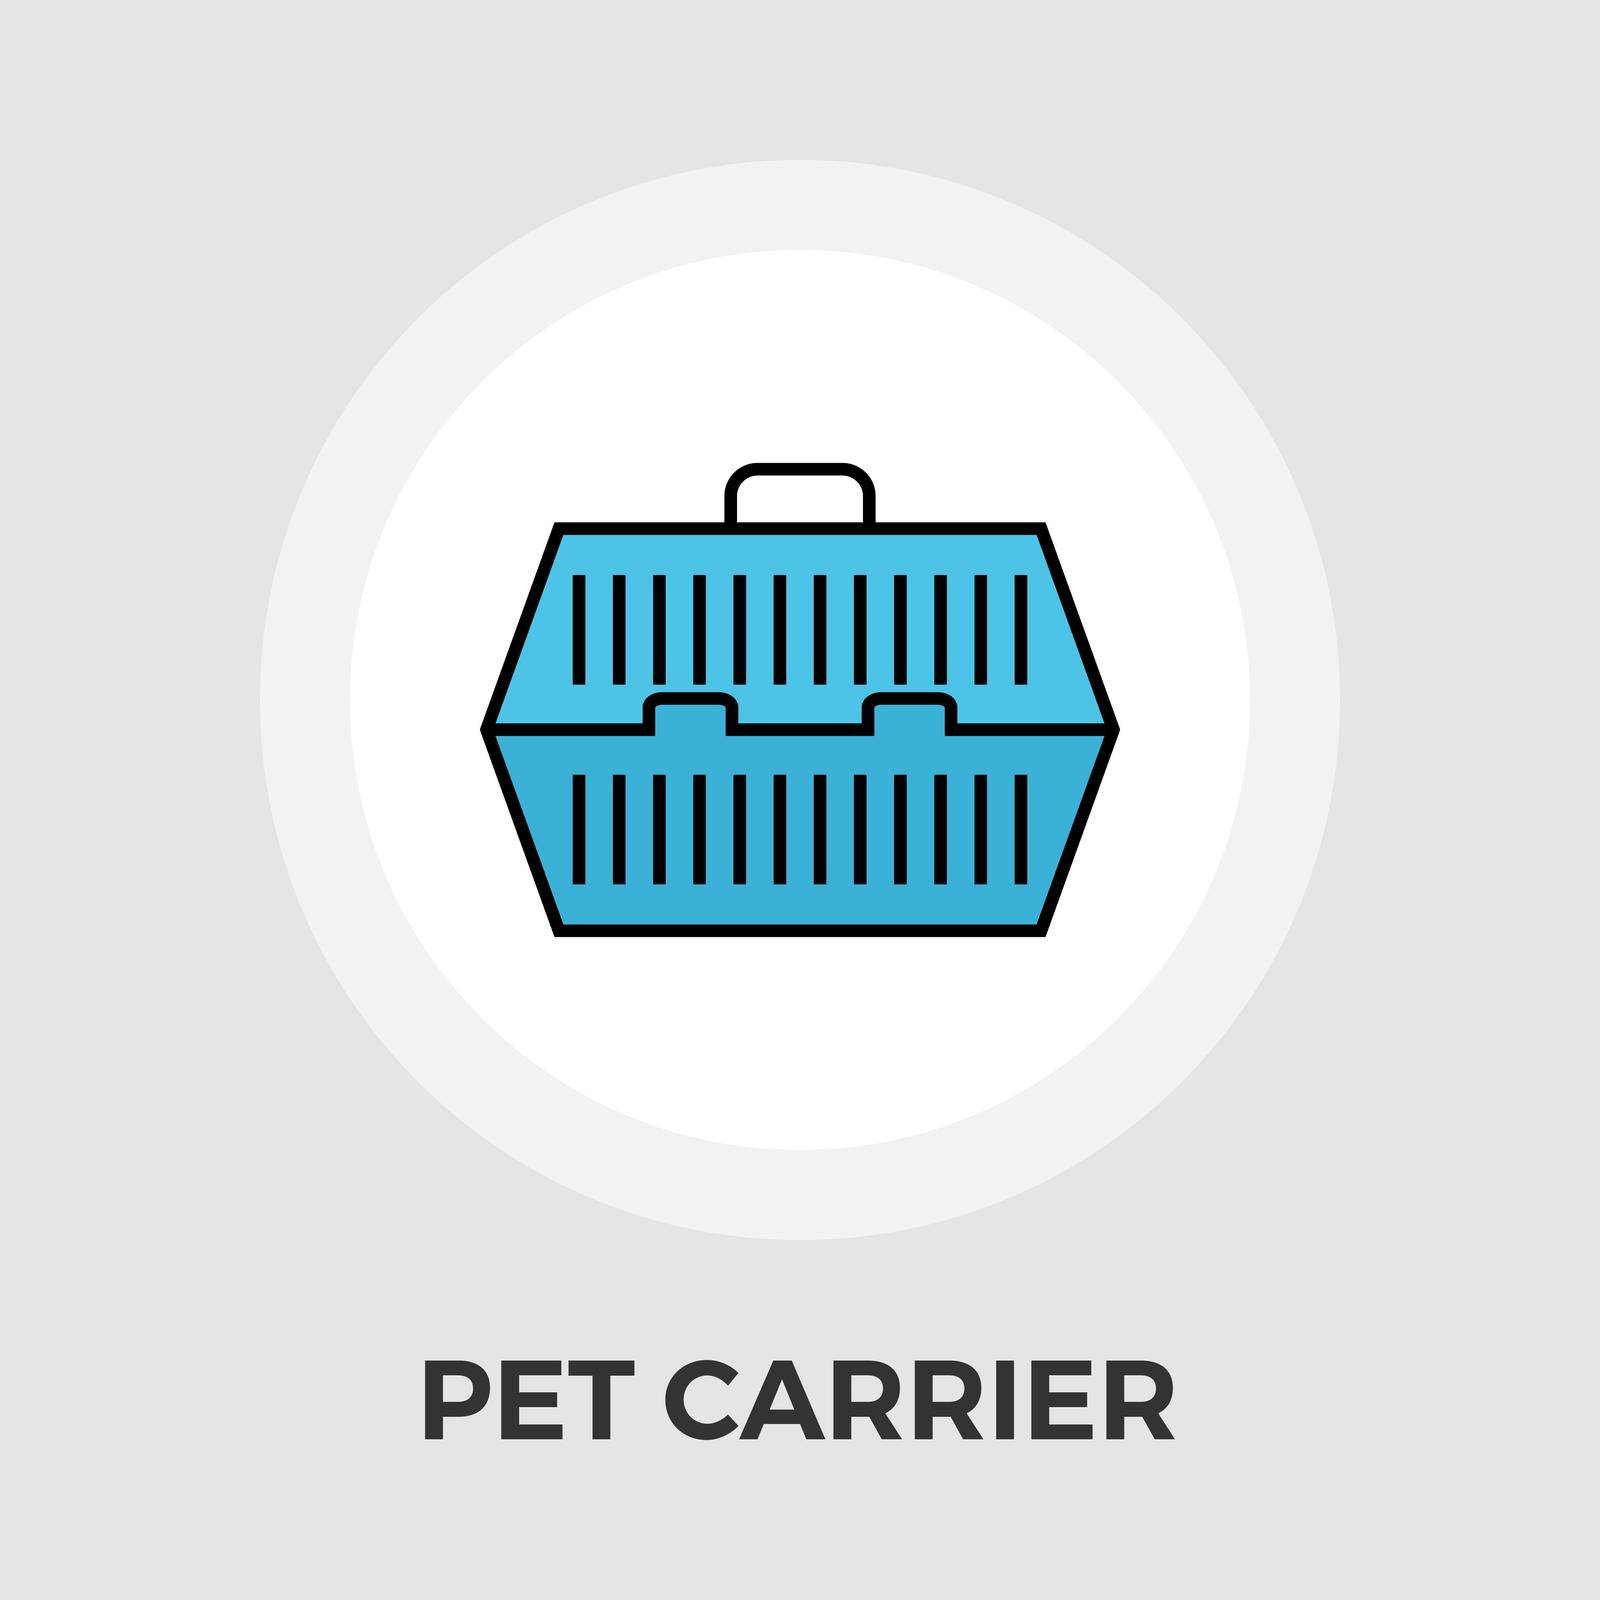 Pet Carrier Icon Vector. Flat icon isolated on the white background. Editable EPS file. Vector illustration.